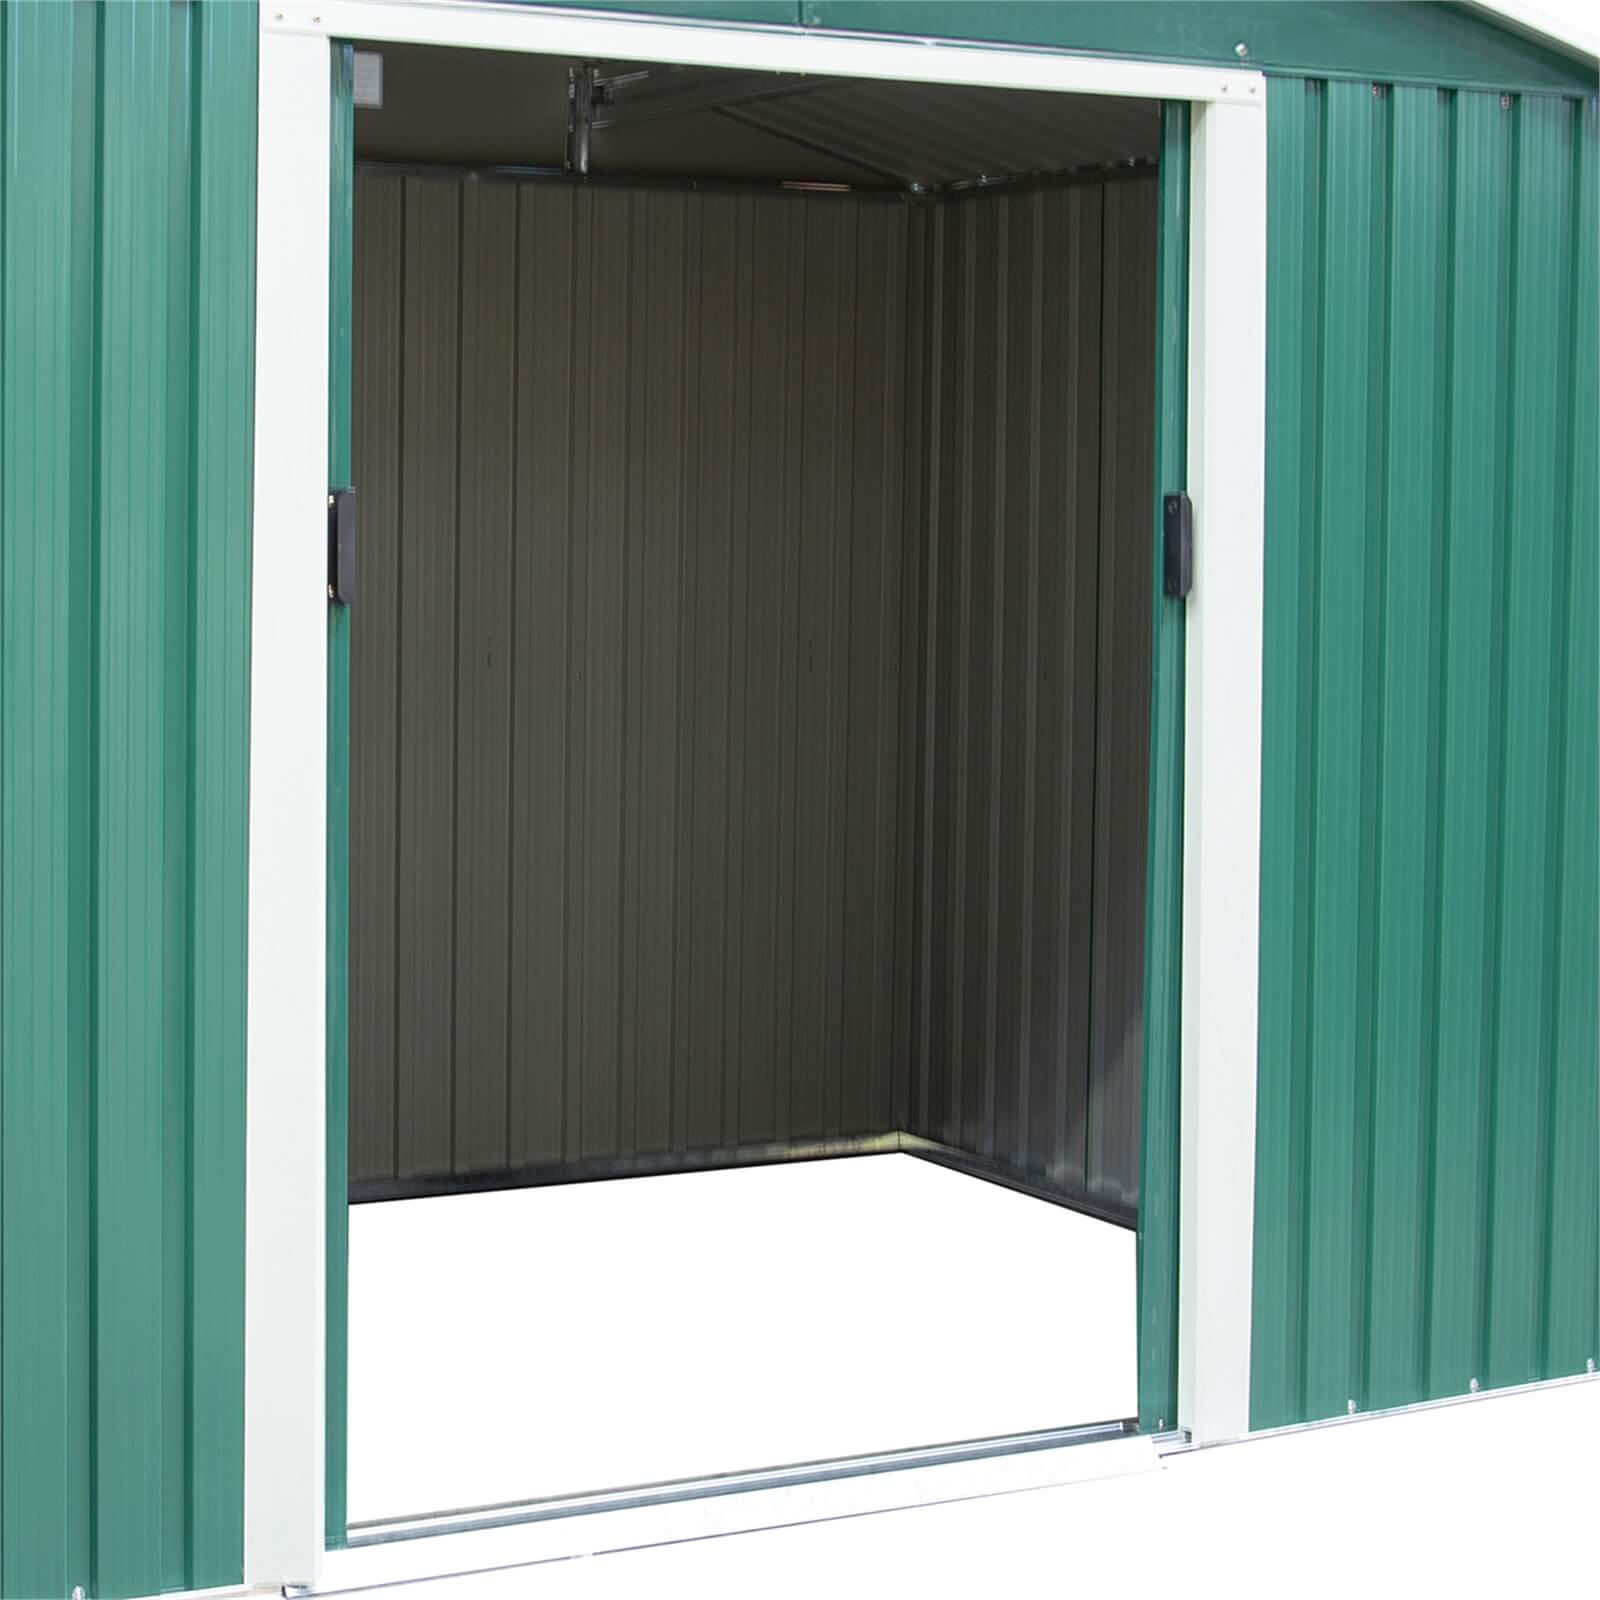 Charles Bentley 8ft x 6ft Green Metal Storage Shed with Zinc Floor Frame